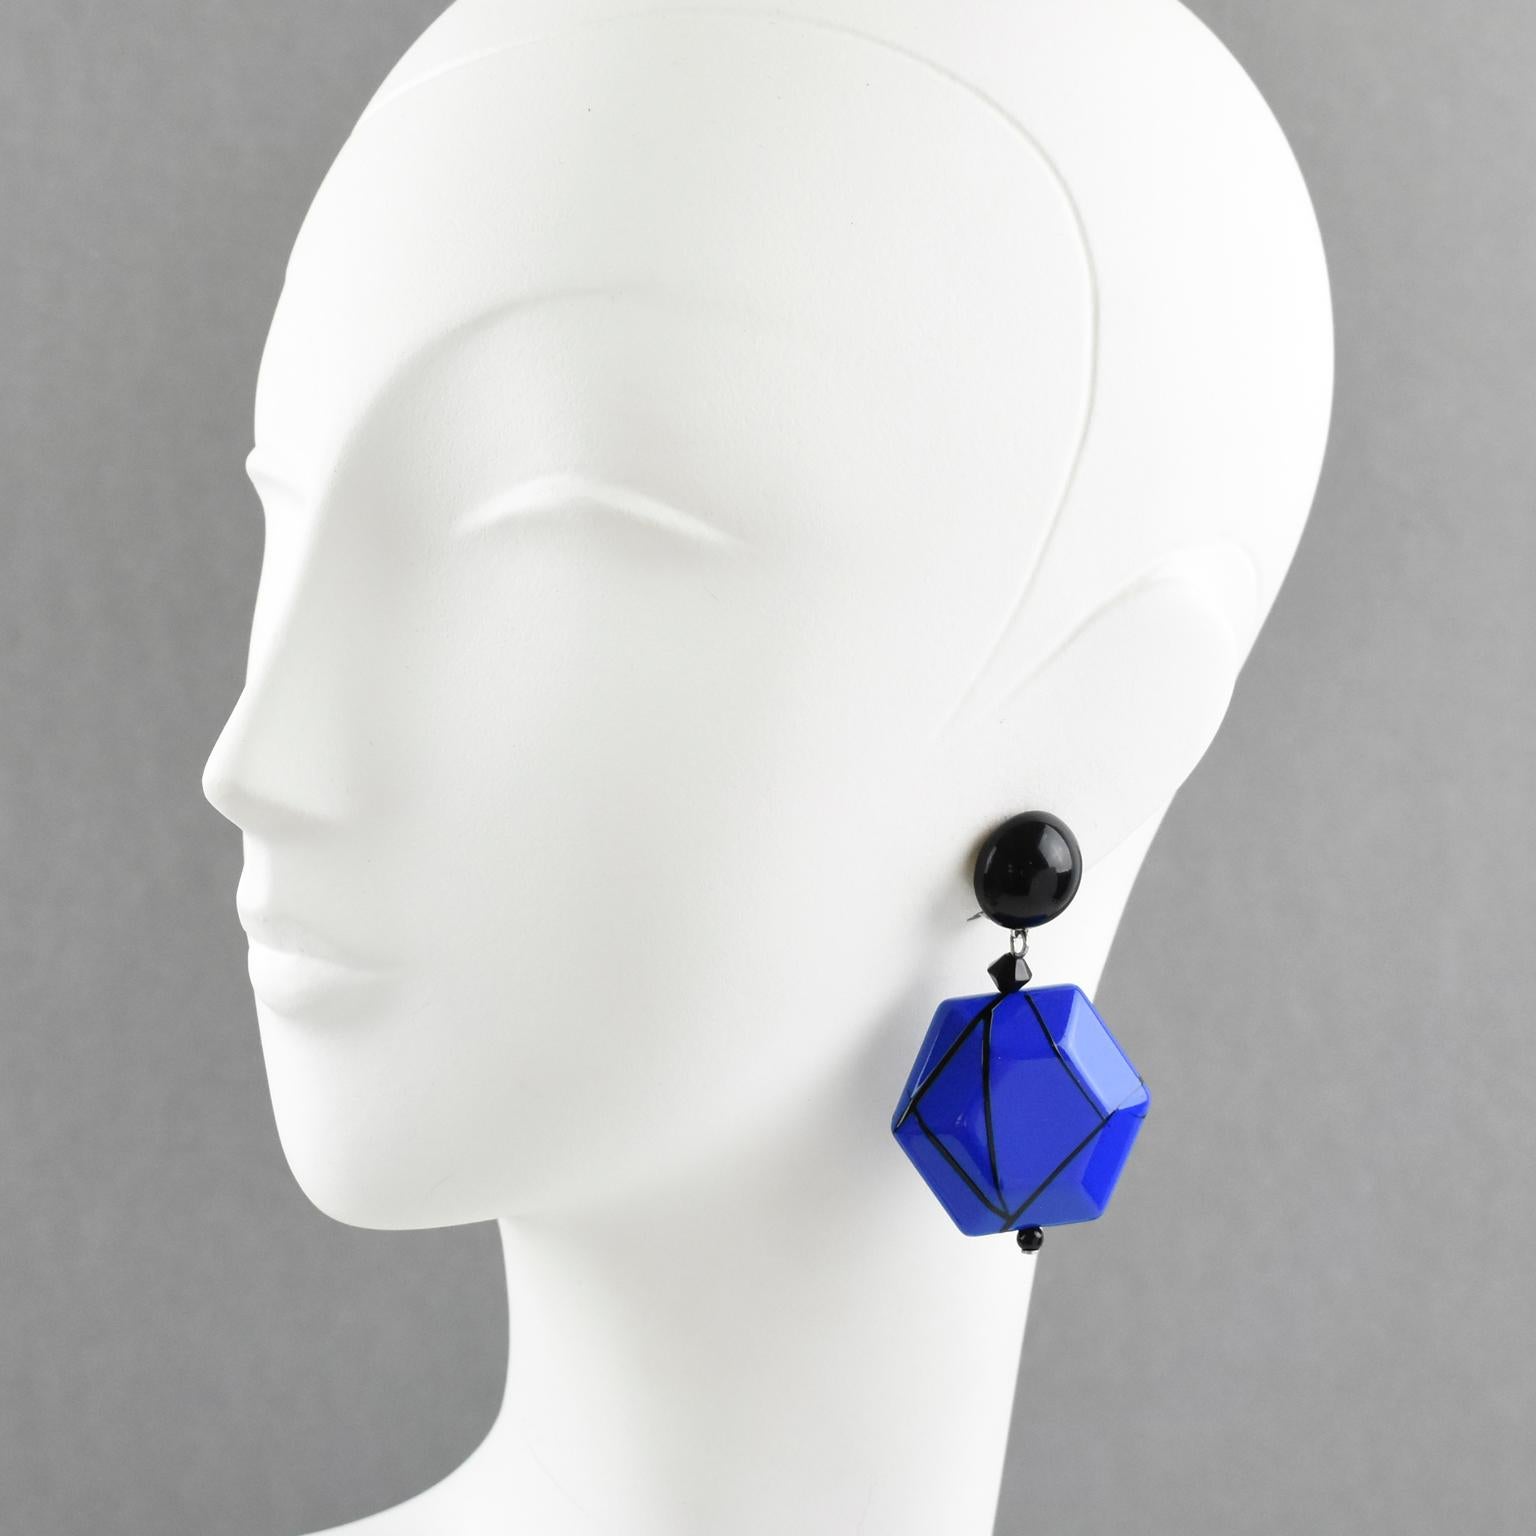 Very chic Angela Caputi, made in Italy resin clip on earrings. Dangling shape with black color contrasted with electric blue resin geometric pebble bead all wrapped around with black lines. Her matching of colors is always extremely classy, perfect